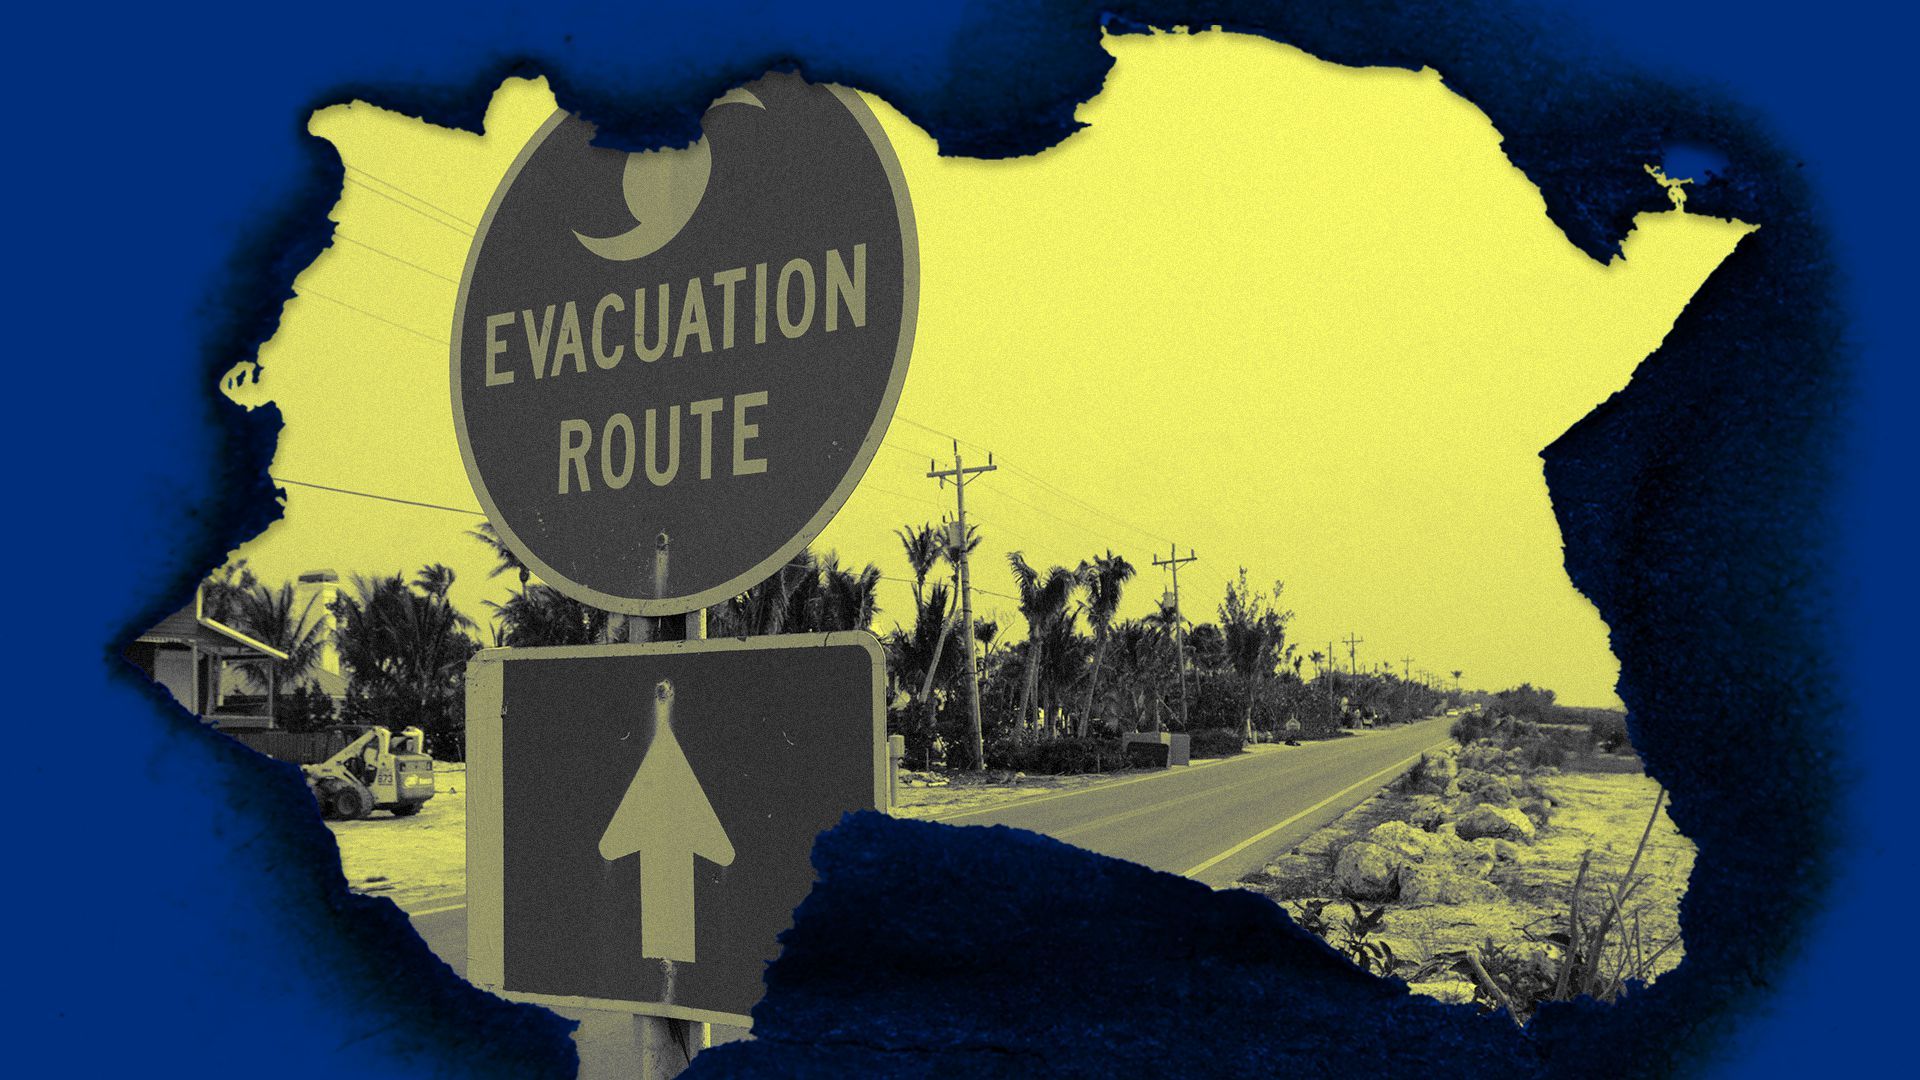 Illustration collage of burned paper framing an environmental scene with an evacuation route road sign